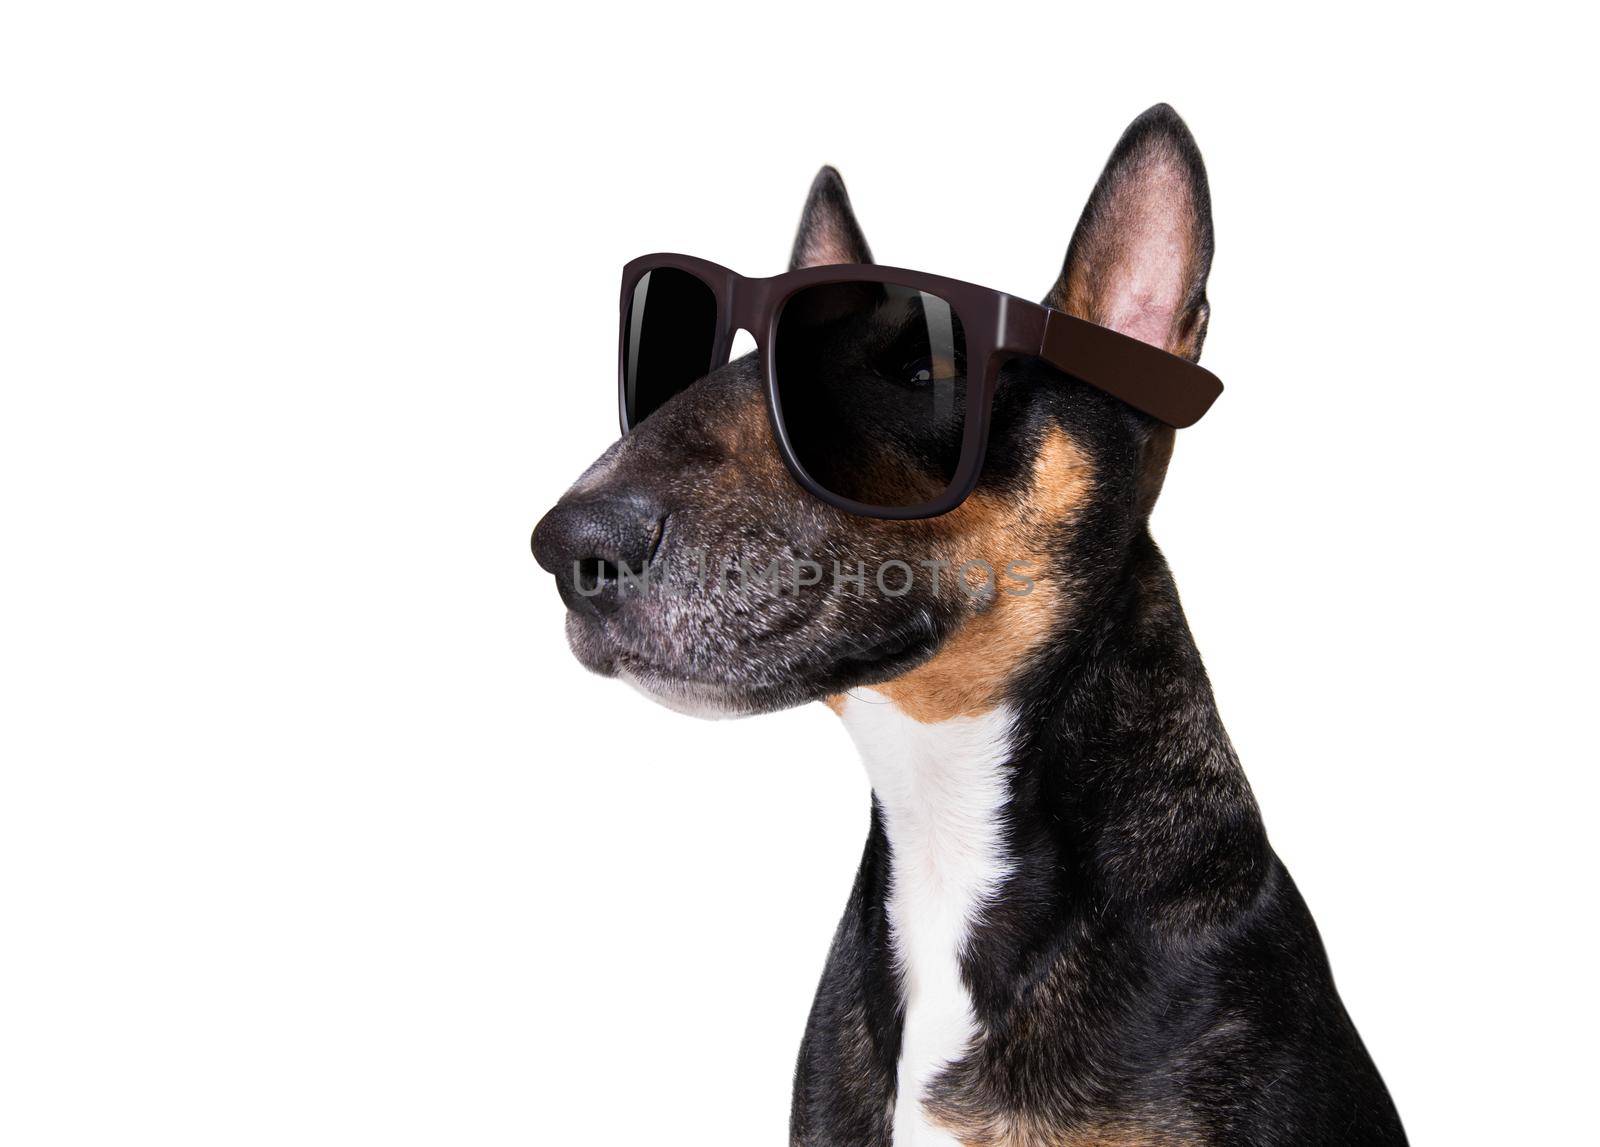 cool dog with sunglasses by Brosch